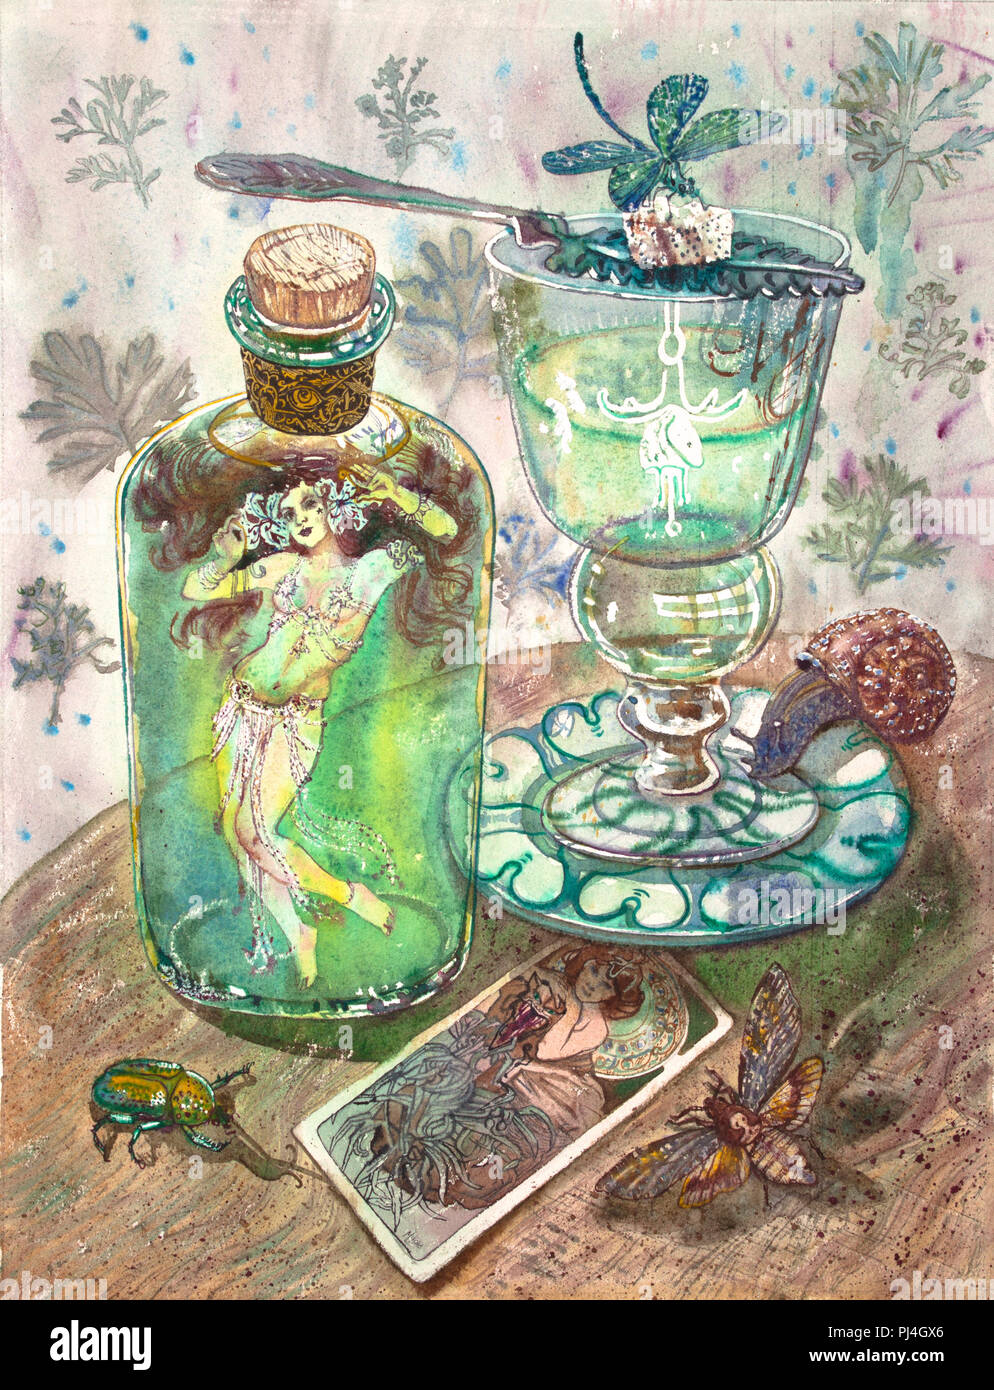 Absinth fairy. Beautiful girl in a belly dance costume, green absinthe bottle, glass, insects, dragonfly, snail, beetle, death's head hawkmoth, art nouveau picture. Fantasy gothic vintage illustration Stock Photo